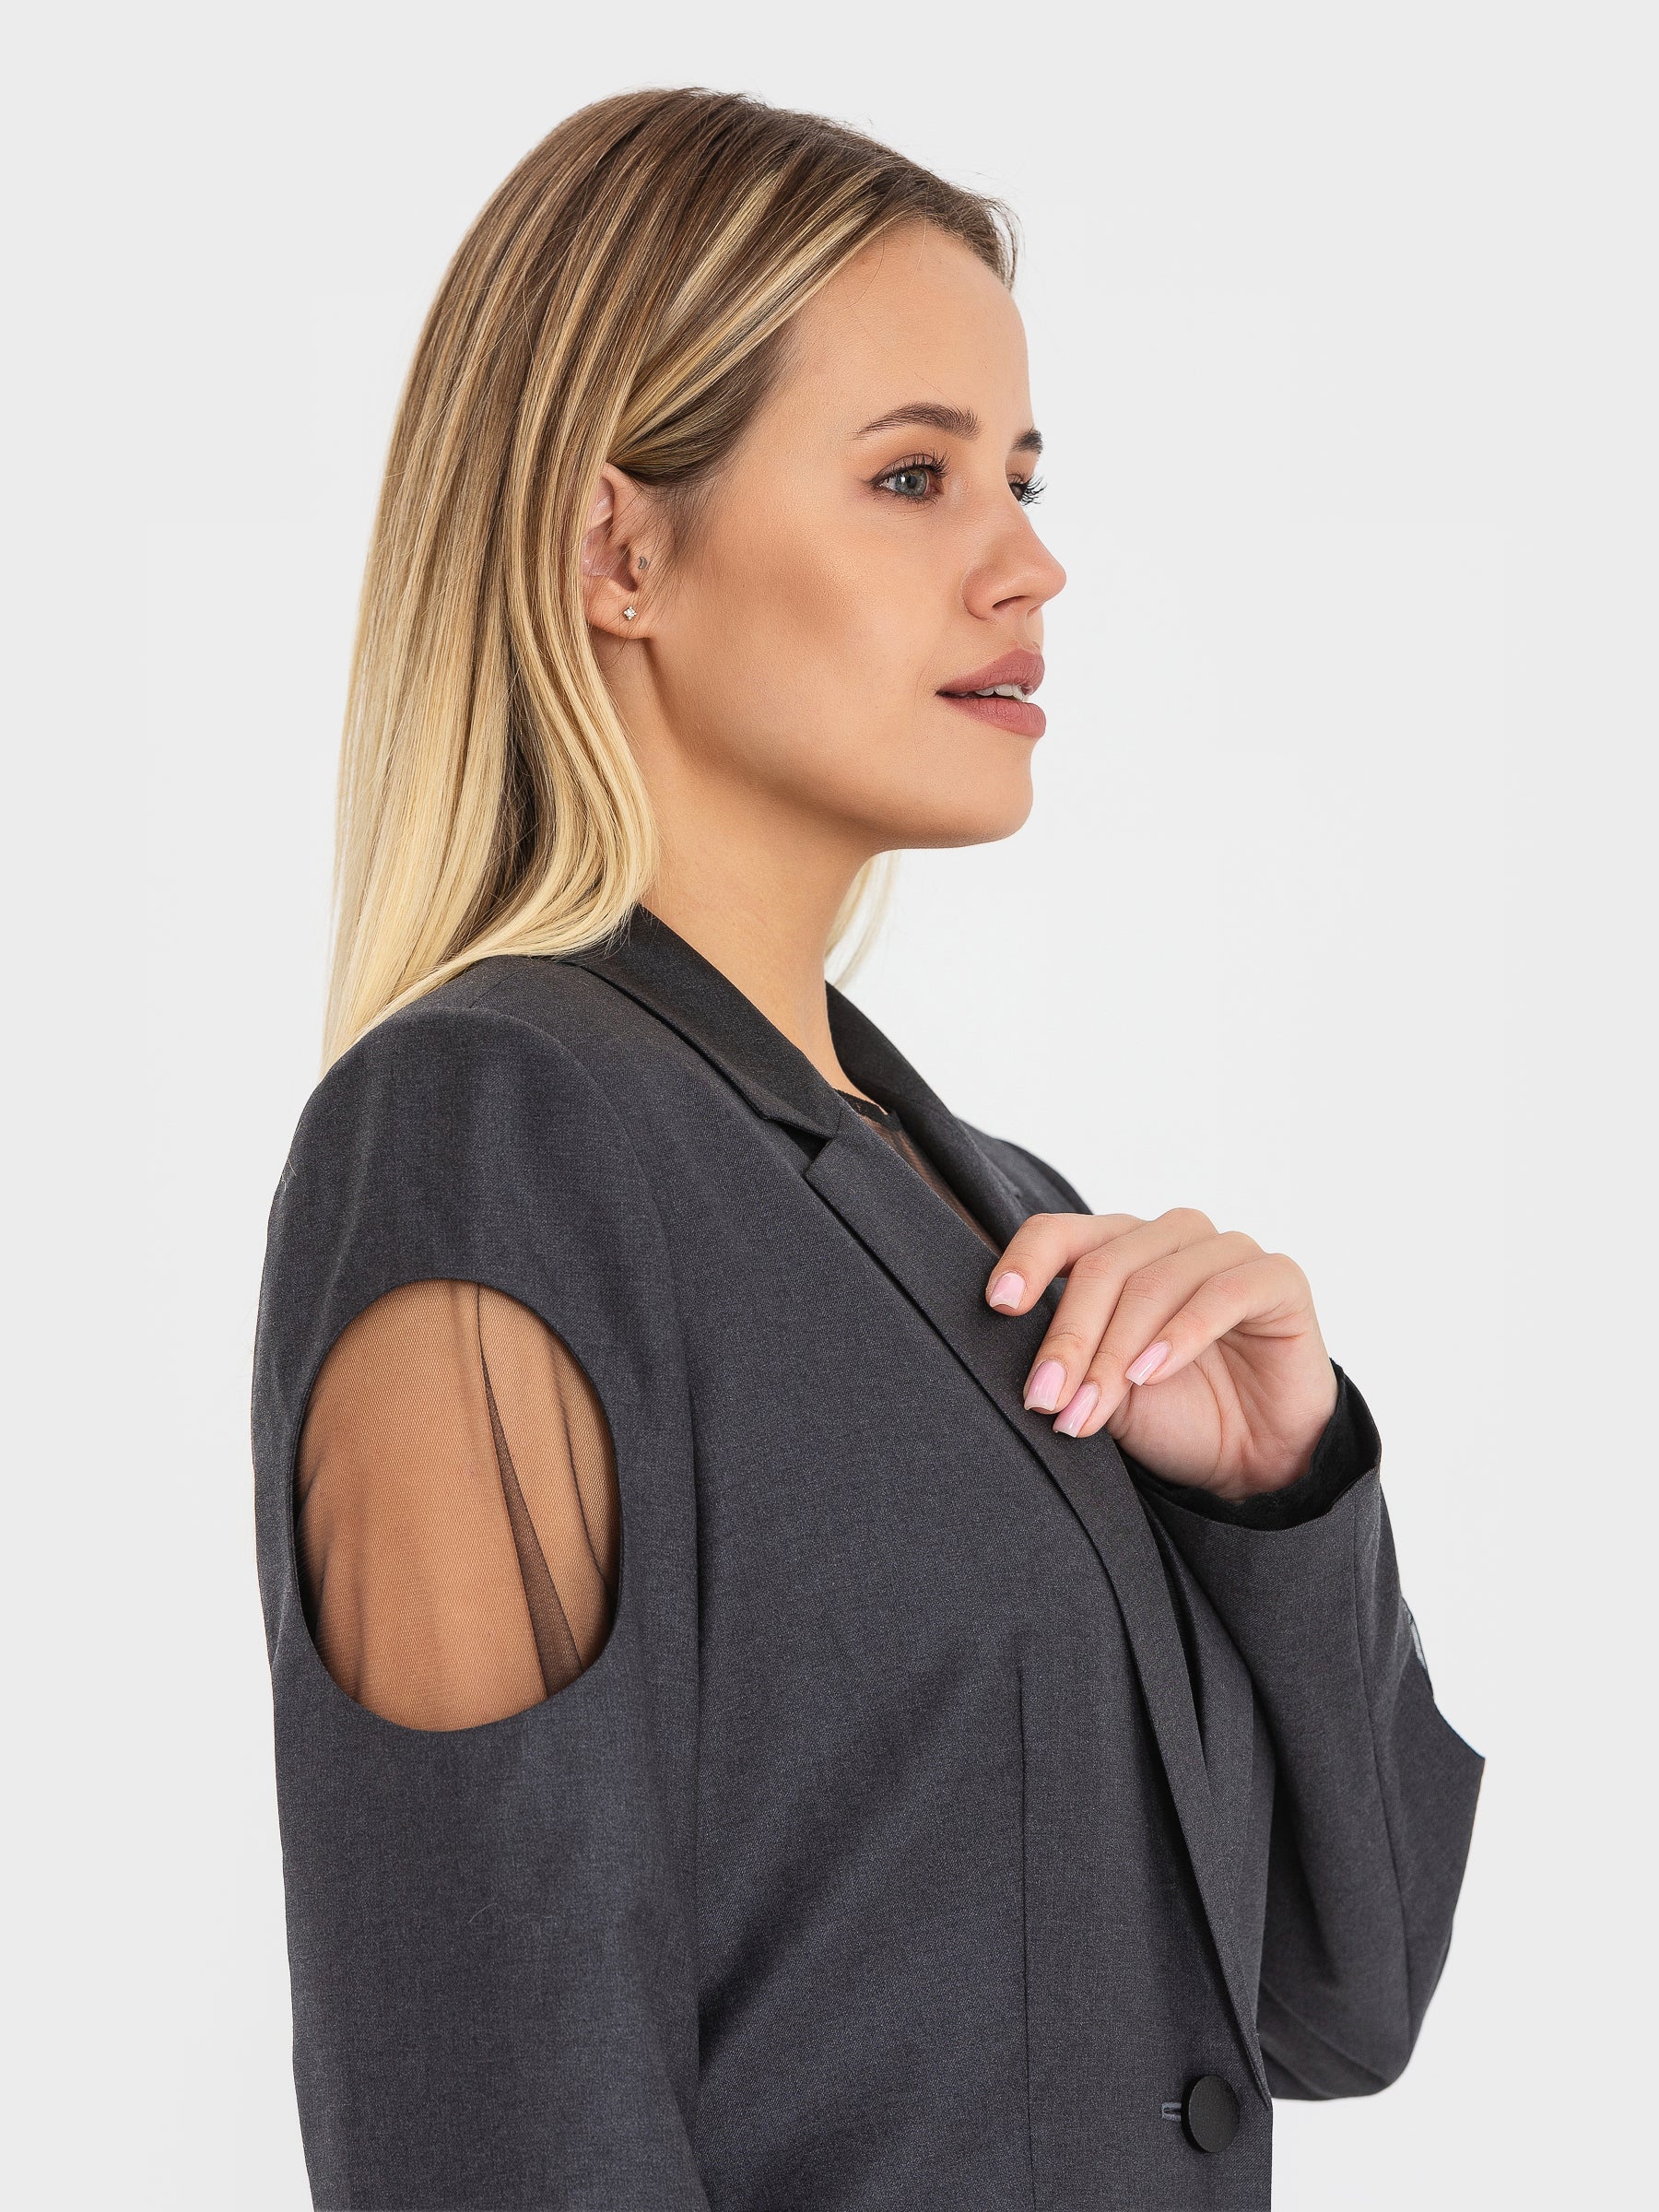 A jacket with cutouts